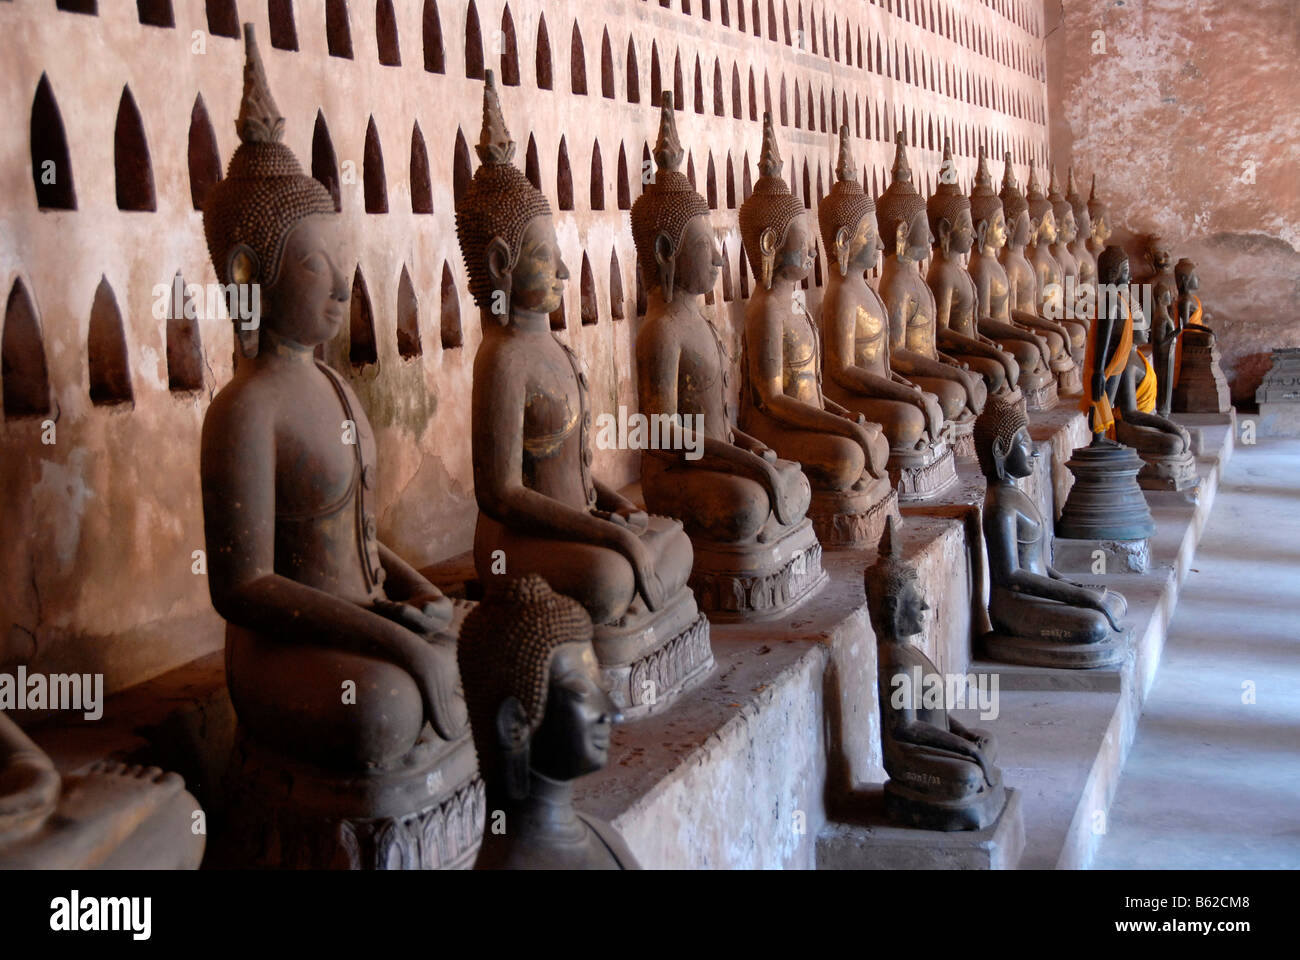 Lots of old Buddha statues in a row, Wat Sisaket, Vientiane, Laos, South East Asia Stock Photo